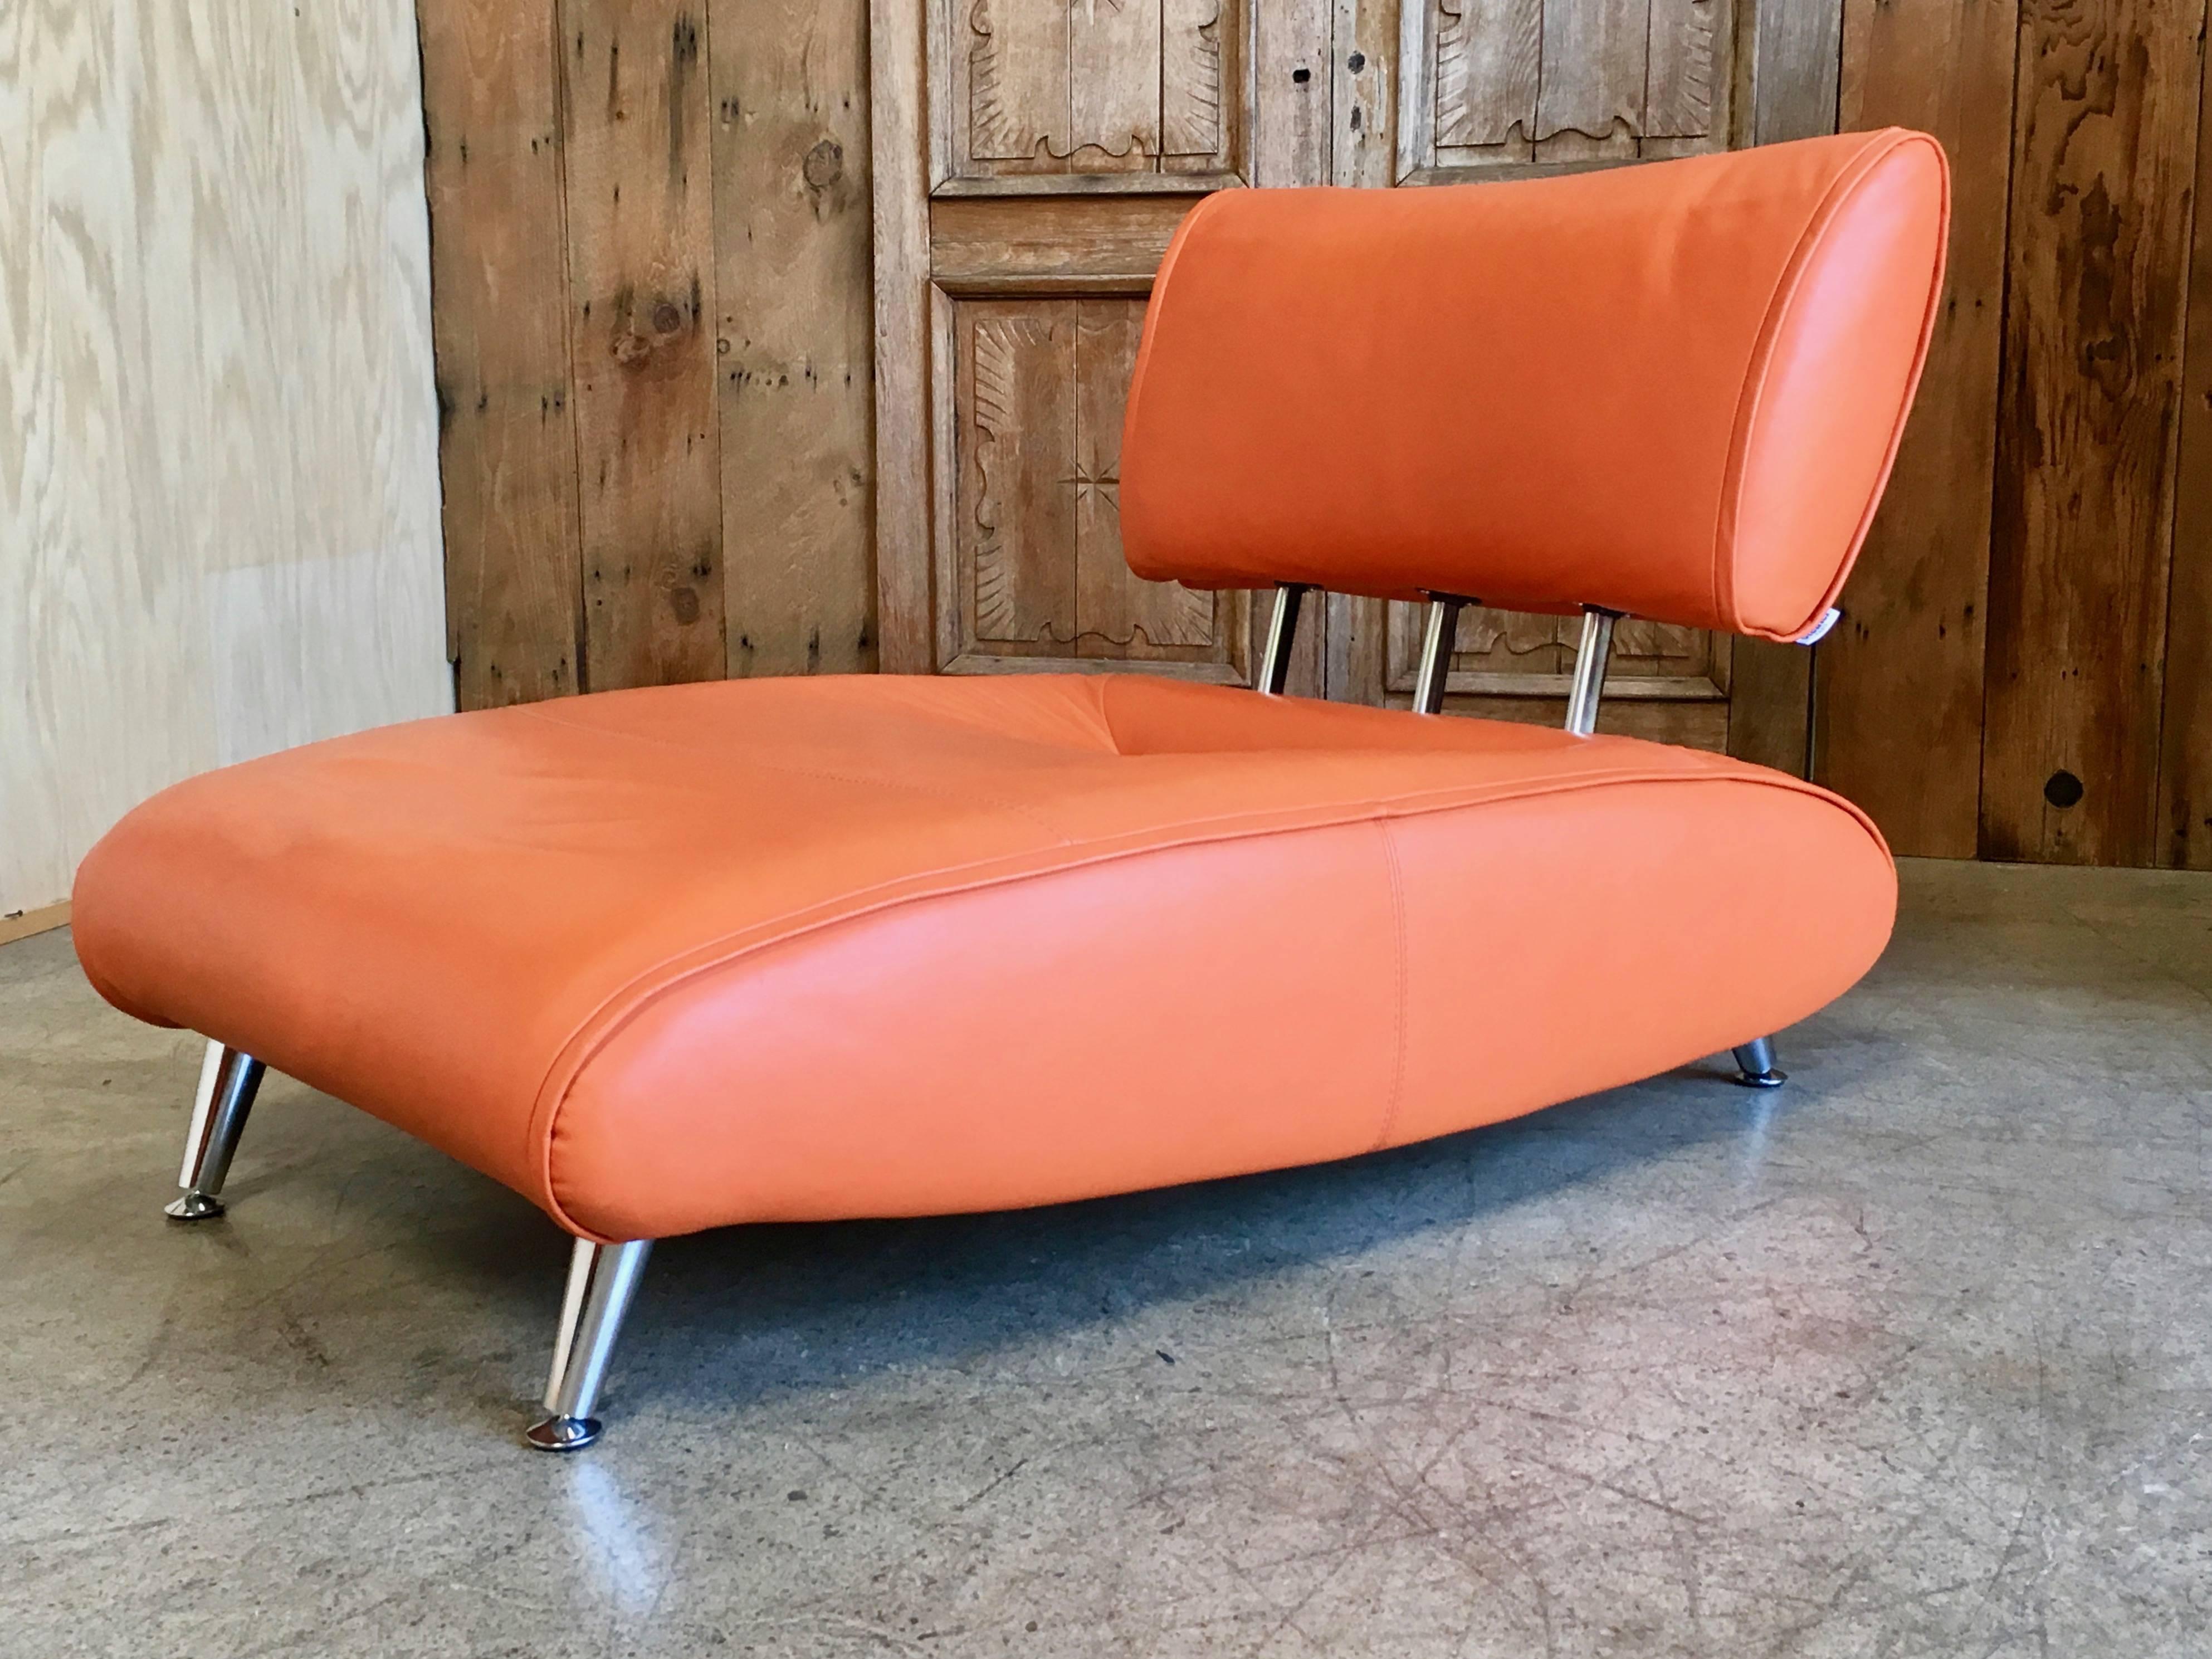 Orange leather with adjustable backrest and chrome legs by Steiner of Paris, France.